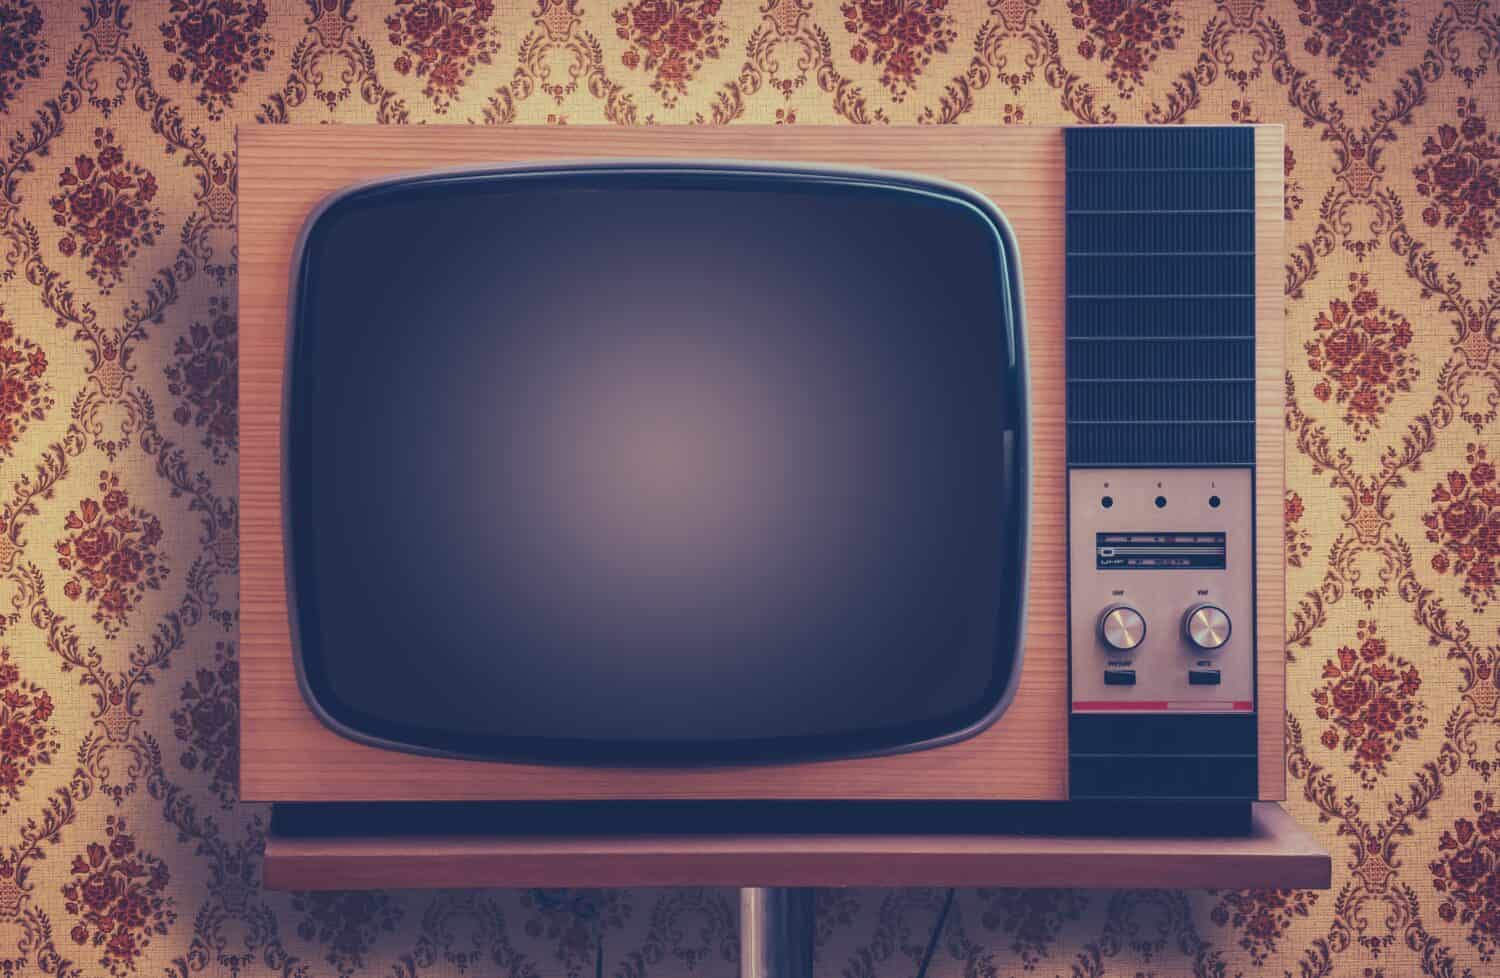 Retro TV In A Room With Ugly 1970s Vintage Wallpaper